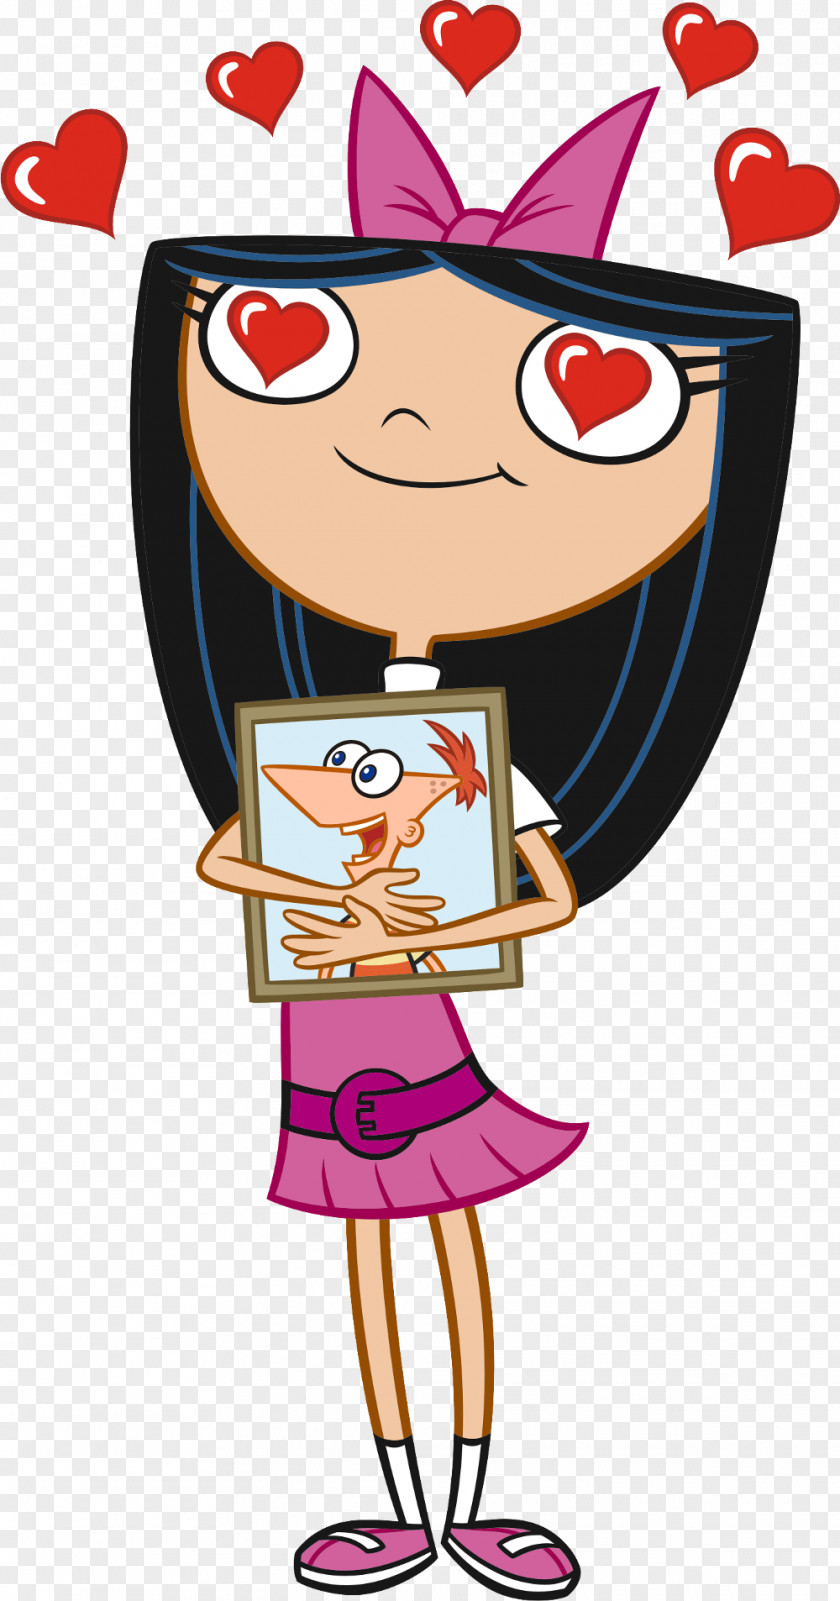 Phineas And Ferb Characters Isabella Garcia-Shapiro Flynn Fletcher Perry The Platypus Costume PNG